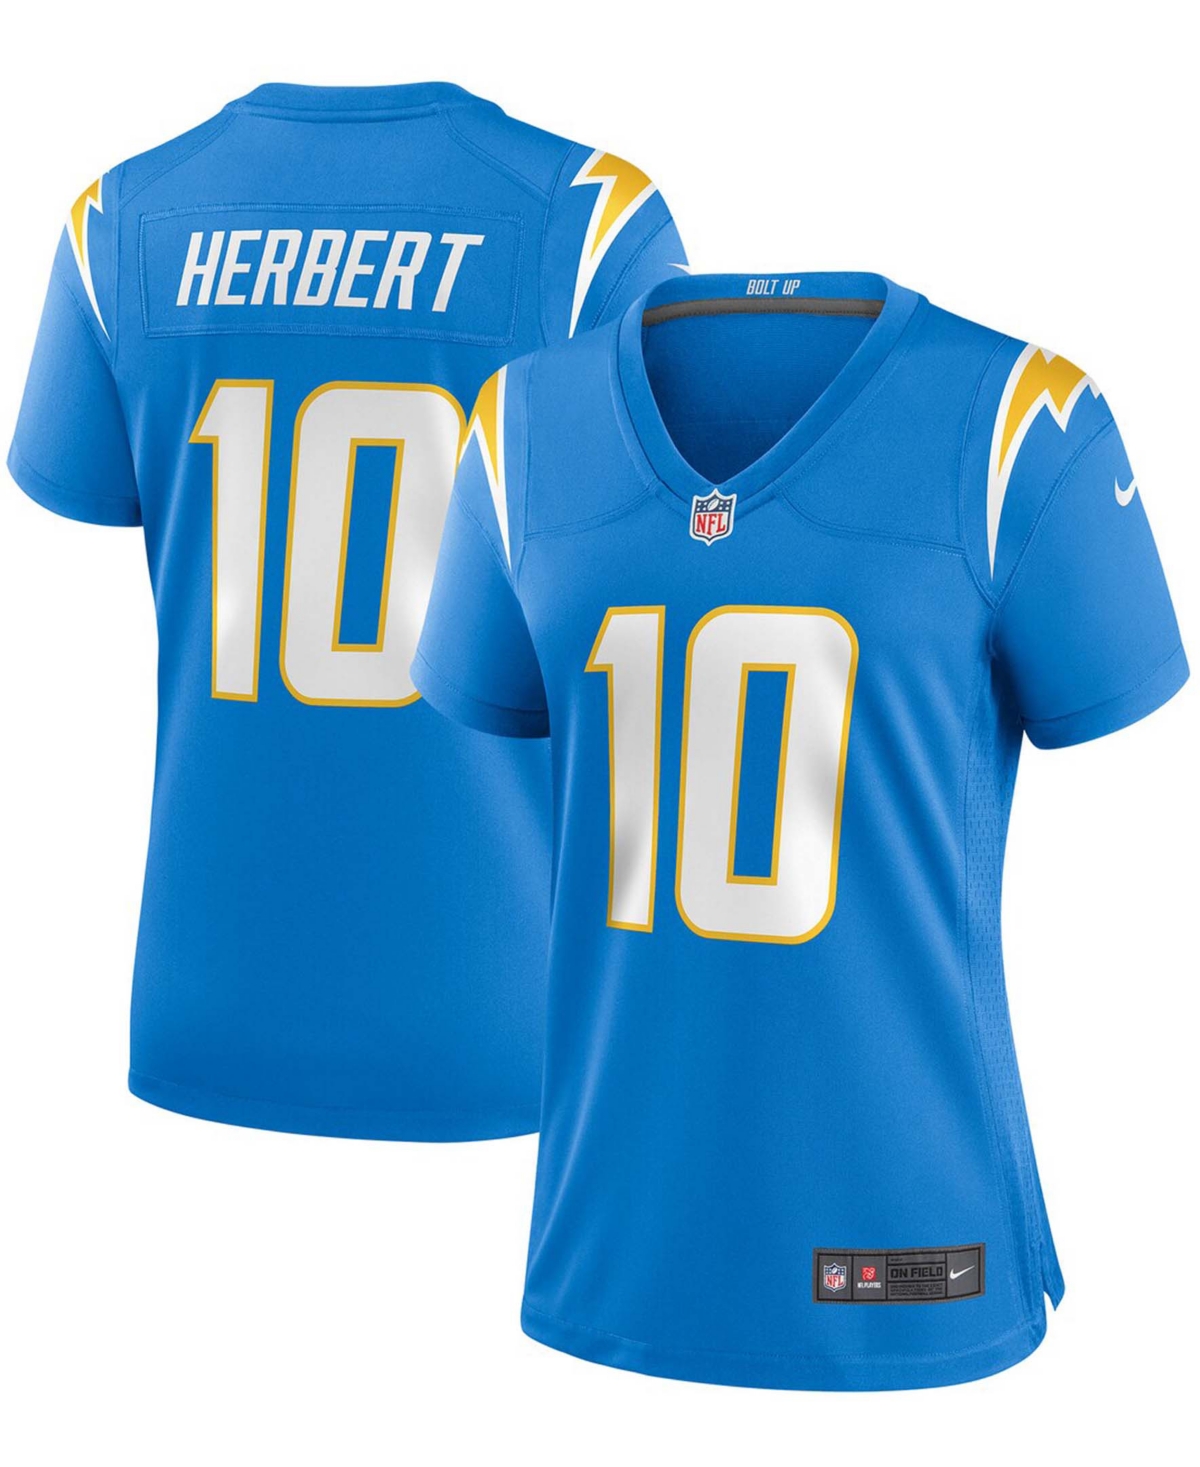 UPC 194804492571 product image for Women's Justin Herbert Powder Blue Los Angeles Chargers Game Jersey | upcitemdb.com